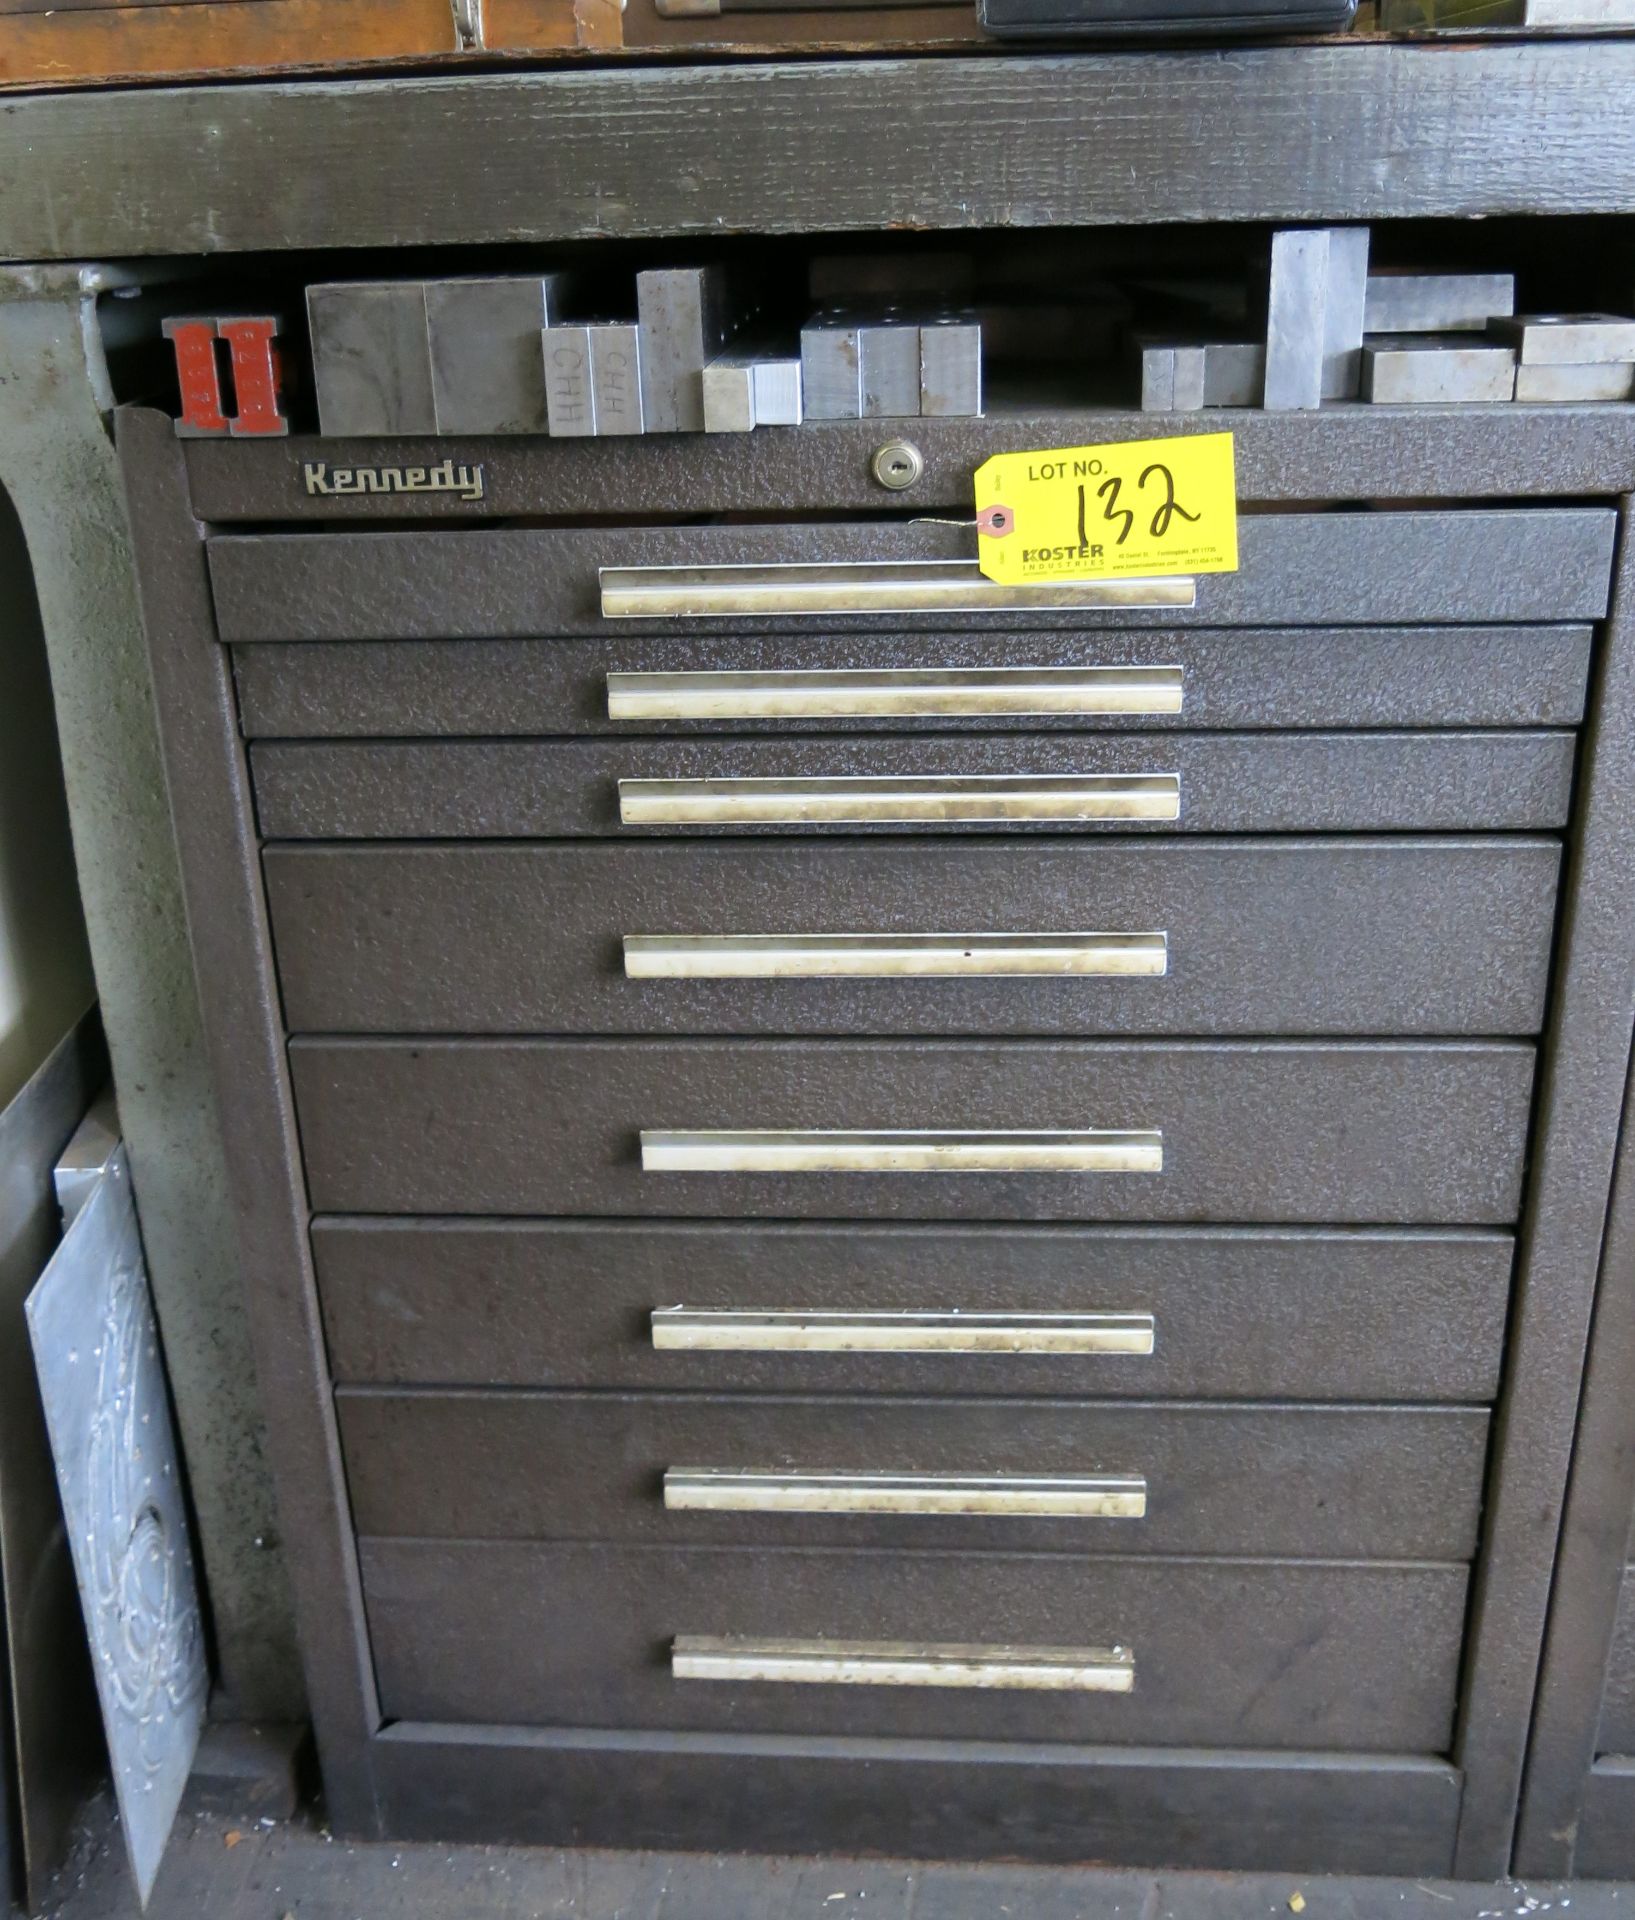 (1) KENNEDY 8-DRAWER TOOL BOX WITH CONTENTS, CONTENTS INCLUDE: O-RINGS, FIXTURES, HELI COIL, DRILL